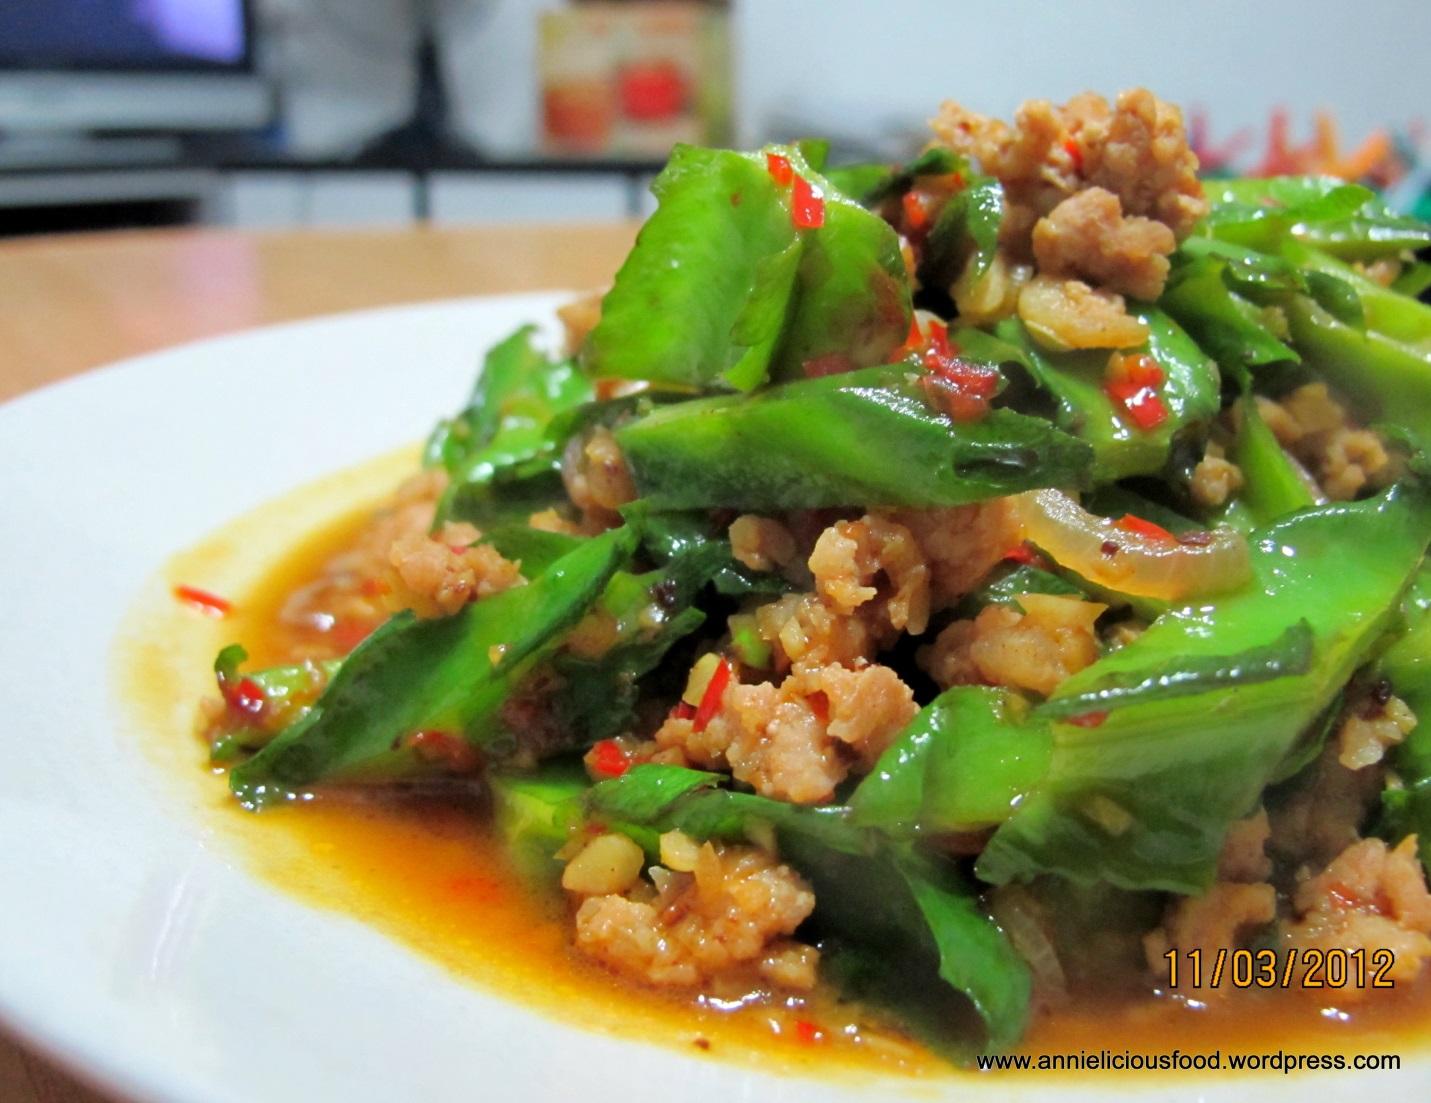 Annielicious Food: Spicy Stir Fried Winged Bean (四角豆)